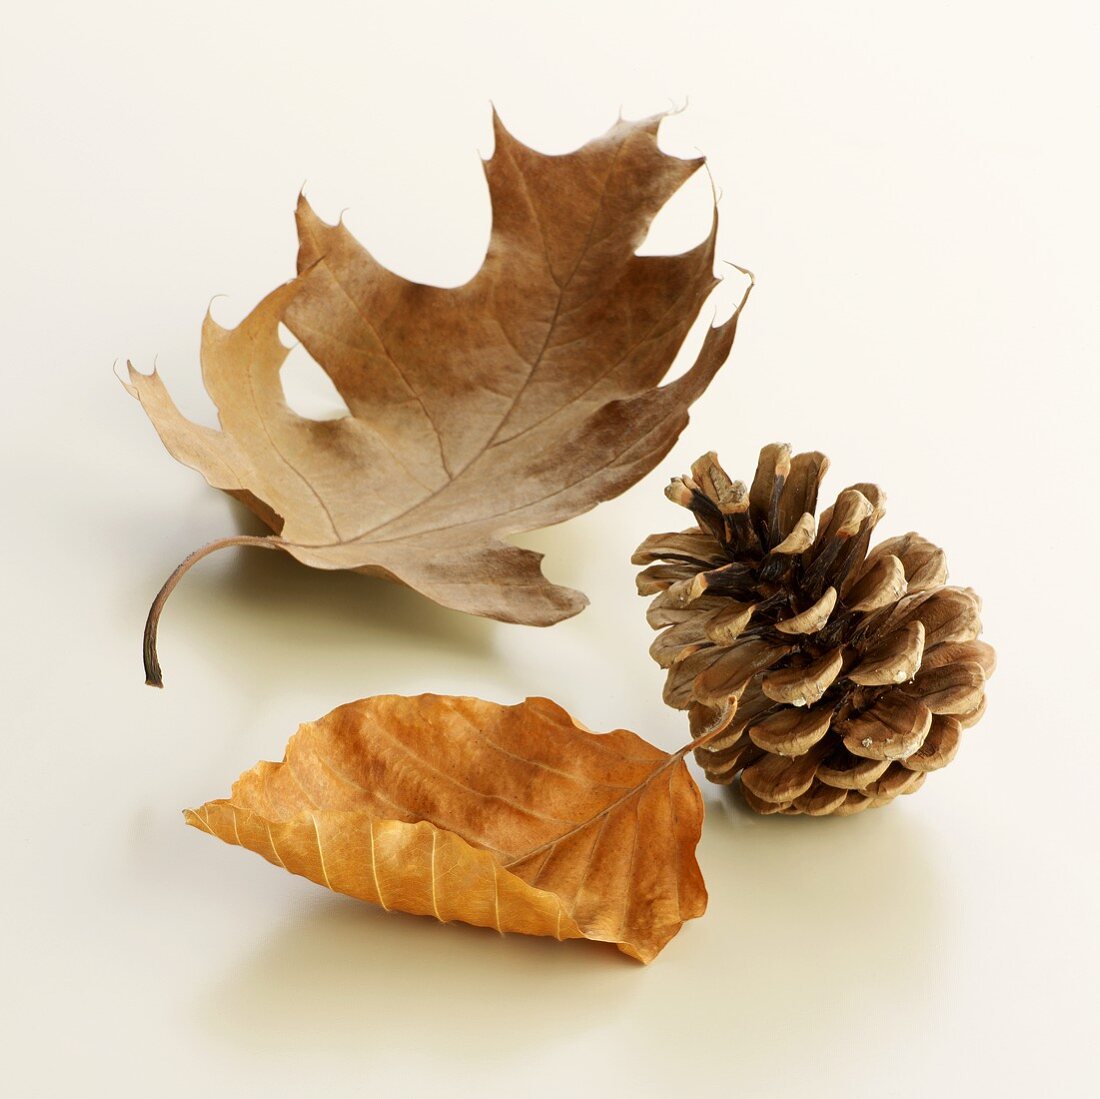 Pine cones and autumn leaves